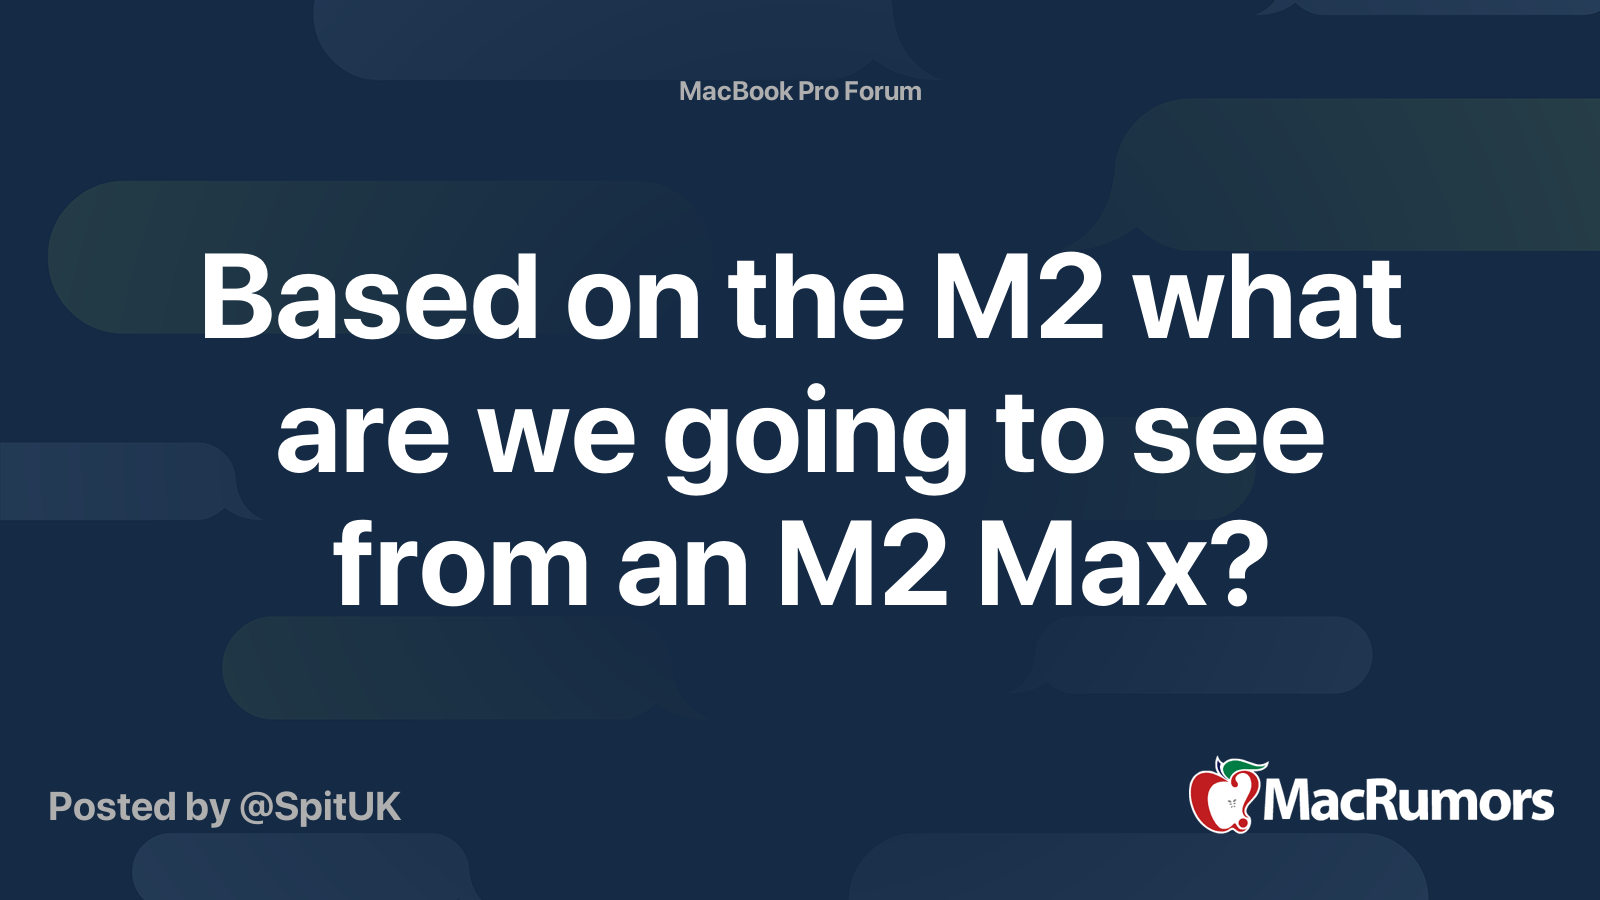 Based on the M2 what are we going to see from an M2 Max?